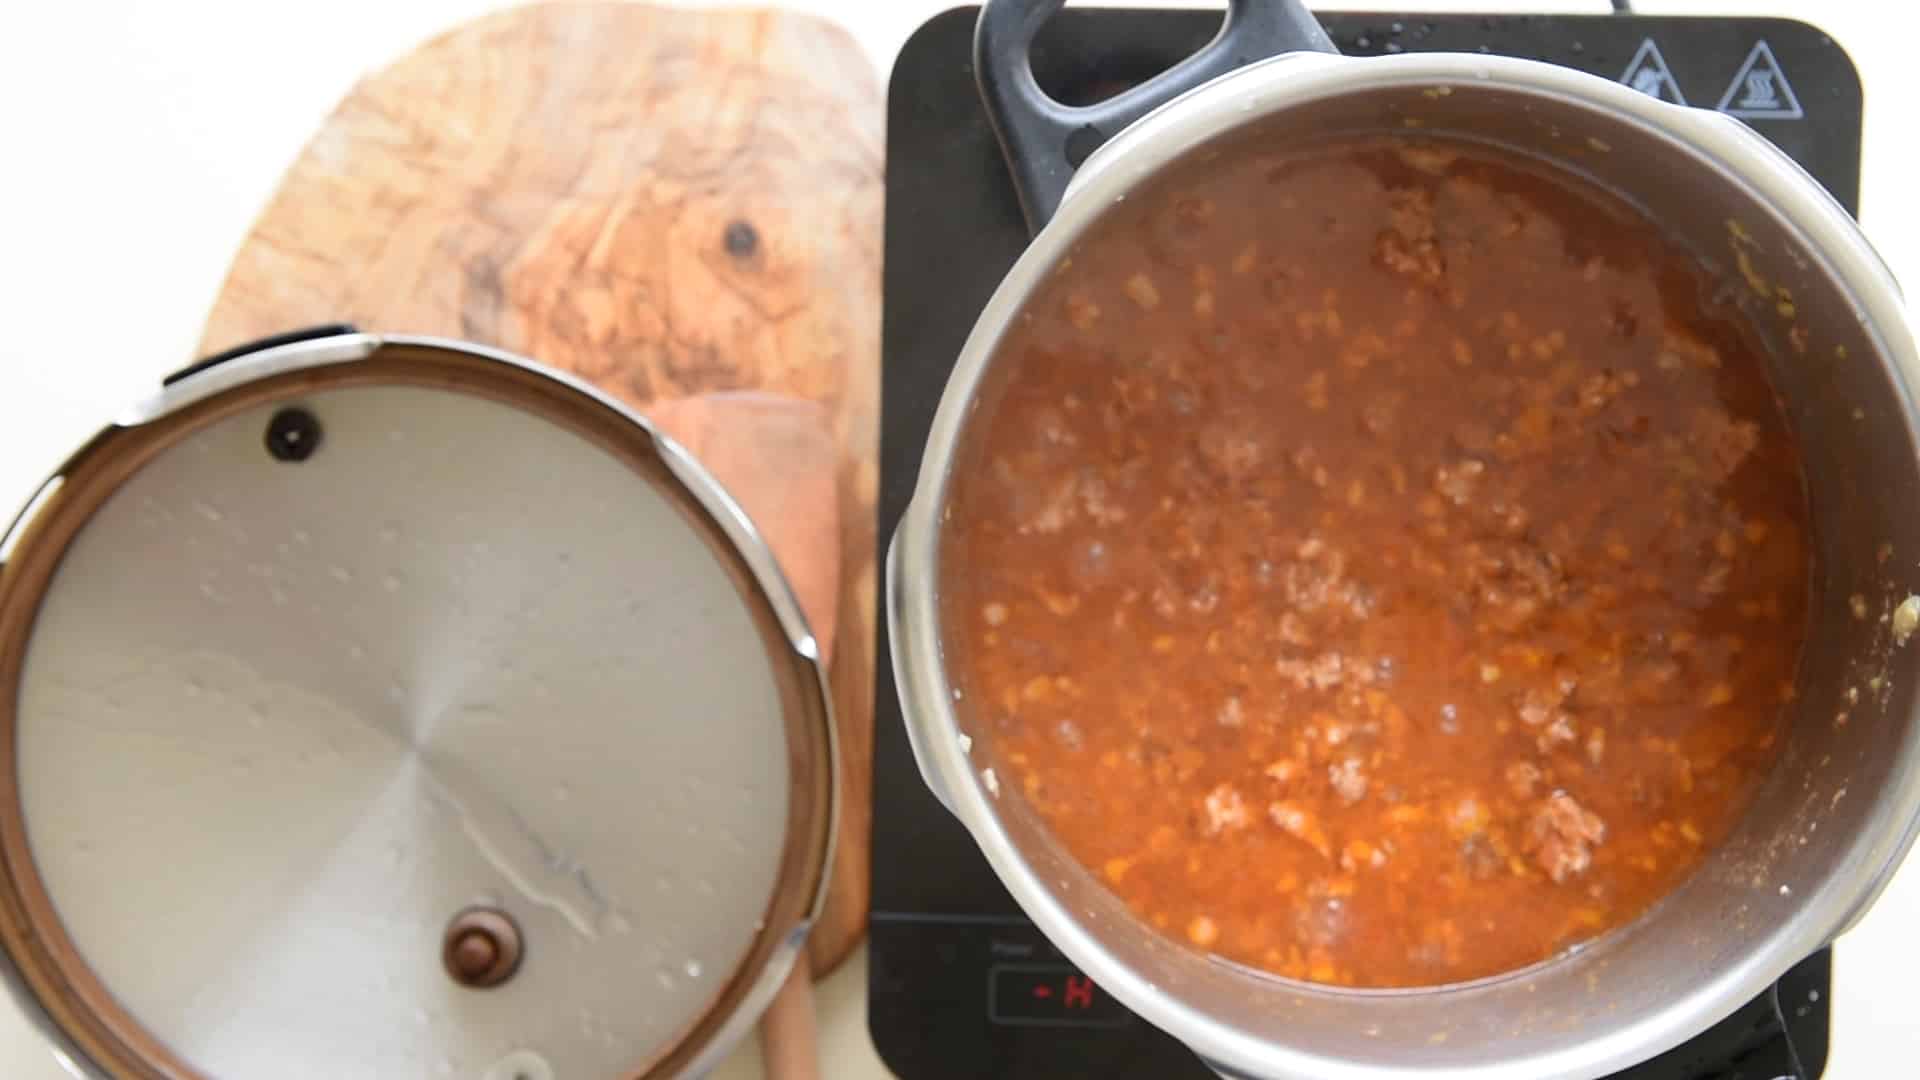 cooking the bolognese sauce in the pressure cooker